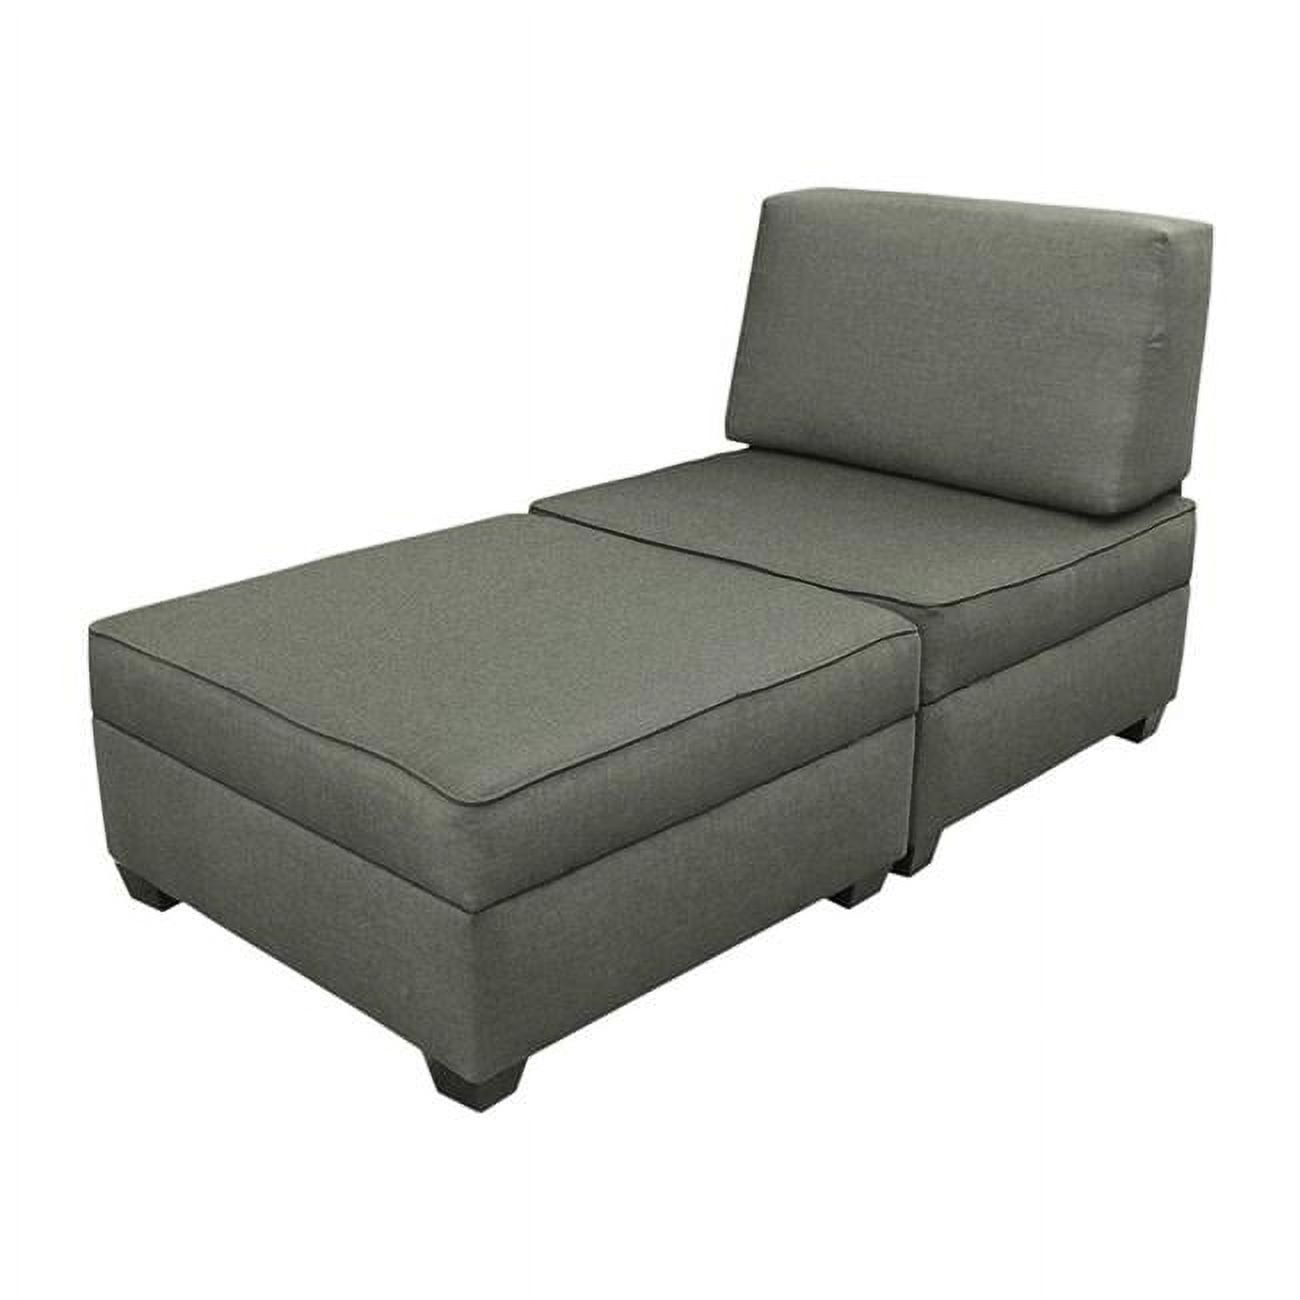 Mfcl30-gr 30 In. Chaise Lounge Storage Ottomans - Flint